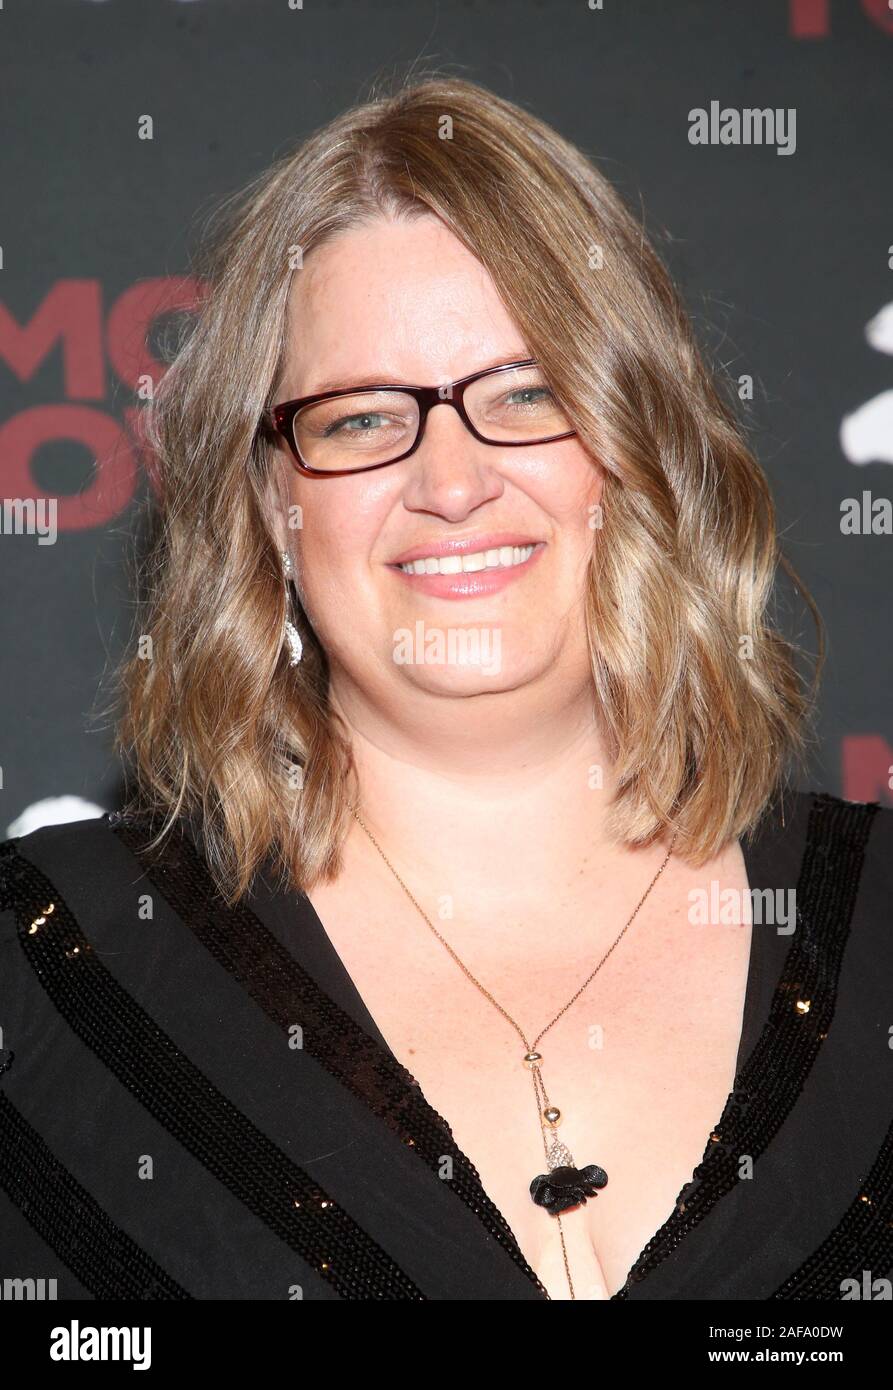 Hollywood, Ca. 13th Dec, 2019. B.D. Gunnell, at Mob Town Los Angeles Premiere at The Los Angeles Film School in Hollywood, California on December 13, 2019. Credit: Faye Sadou/Media Punch/Alamy Live News Stock Photo